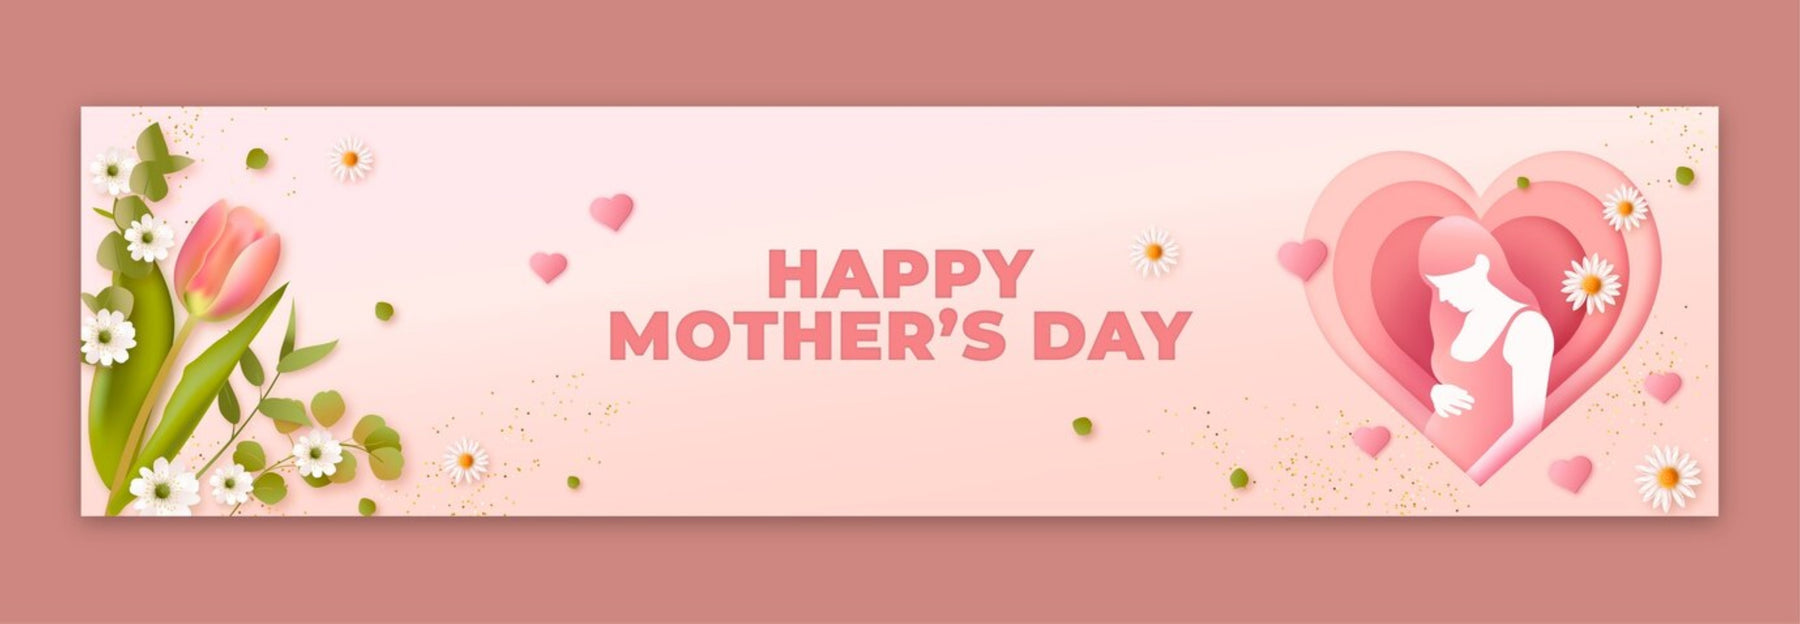 10 ideas for the messages you can write on a card to Mom on Mother's day